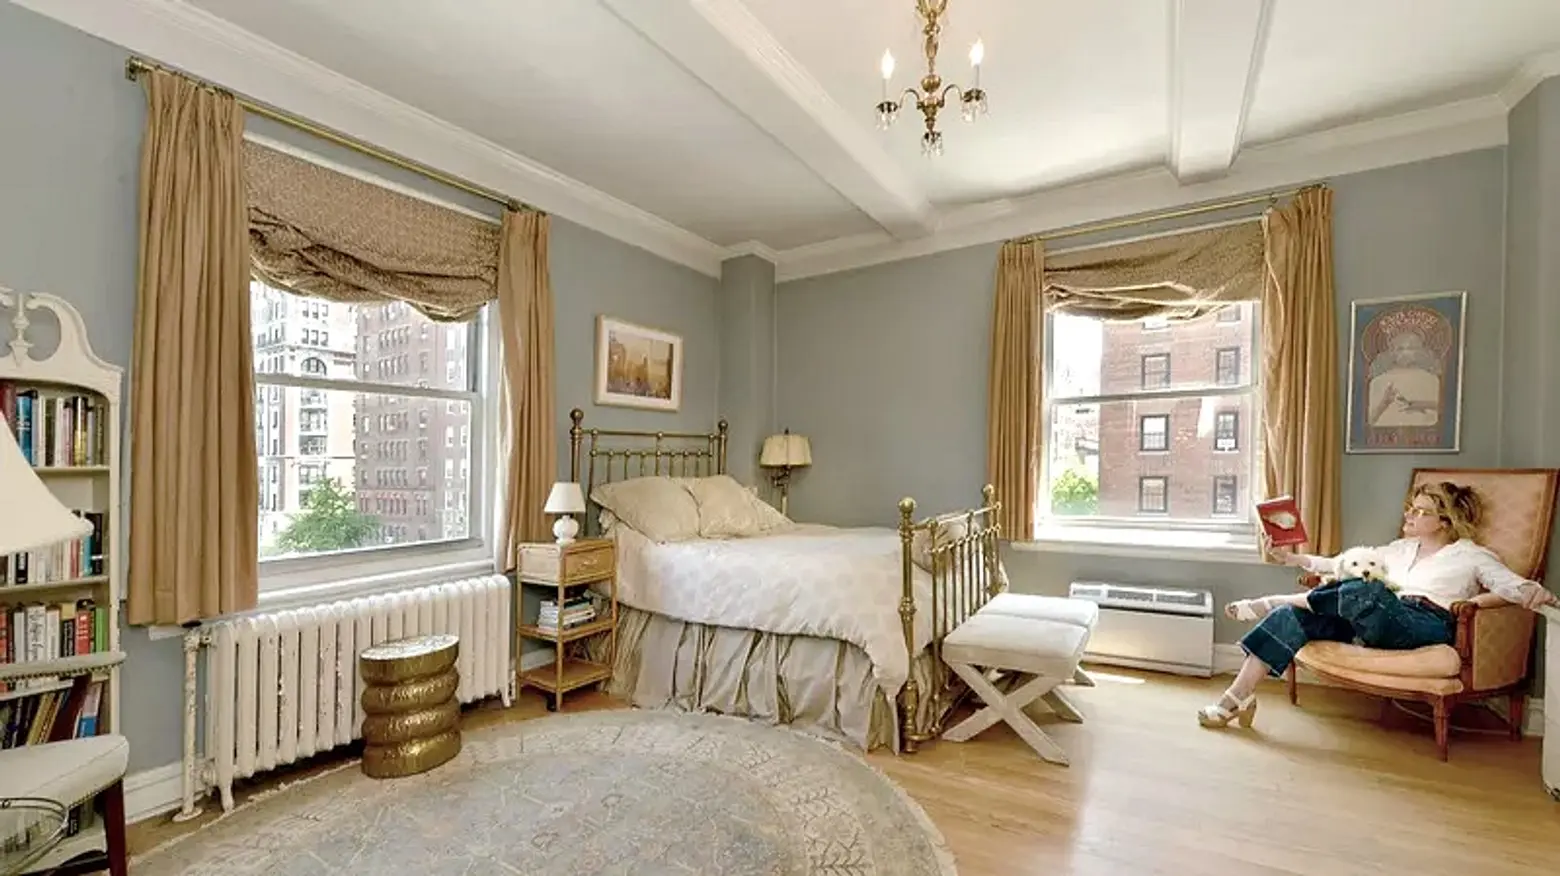 Parker Posey Unloads Her $1.45M Greenwich Village Co-op in Less Than Two Months